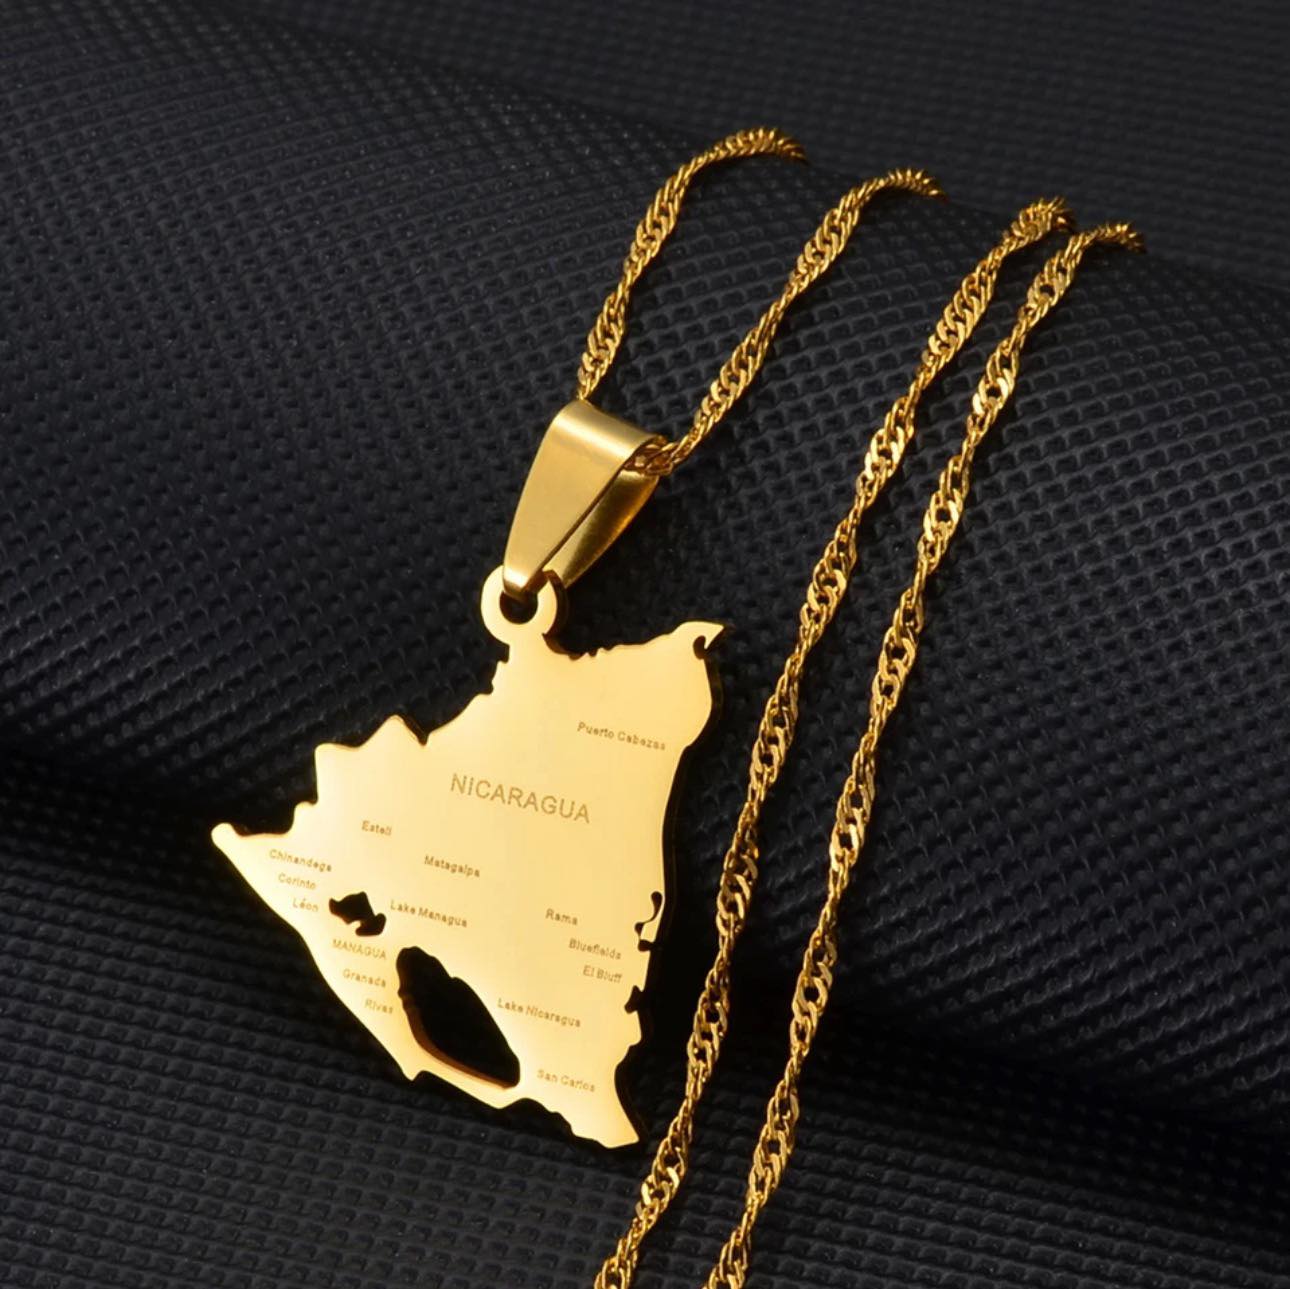 Nicaragua Map & Cities Necklace